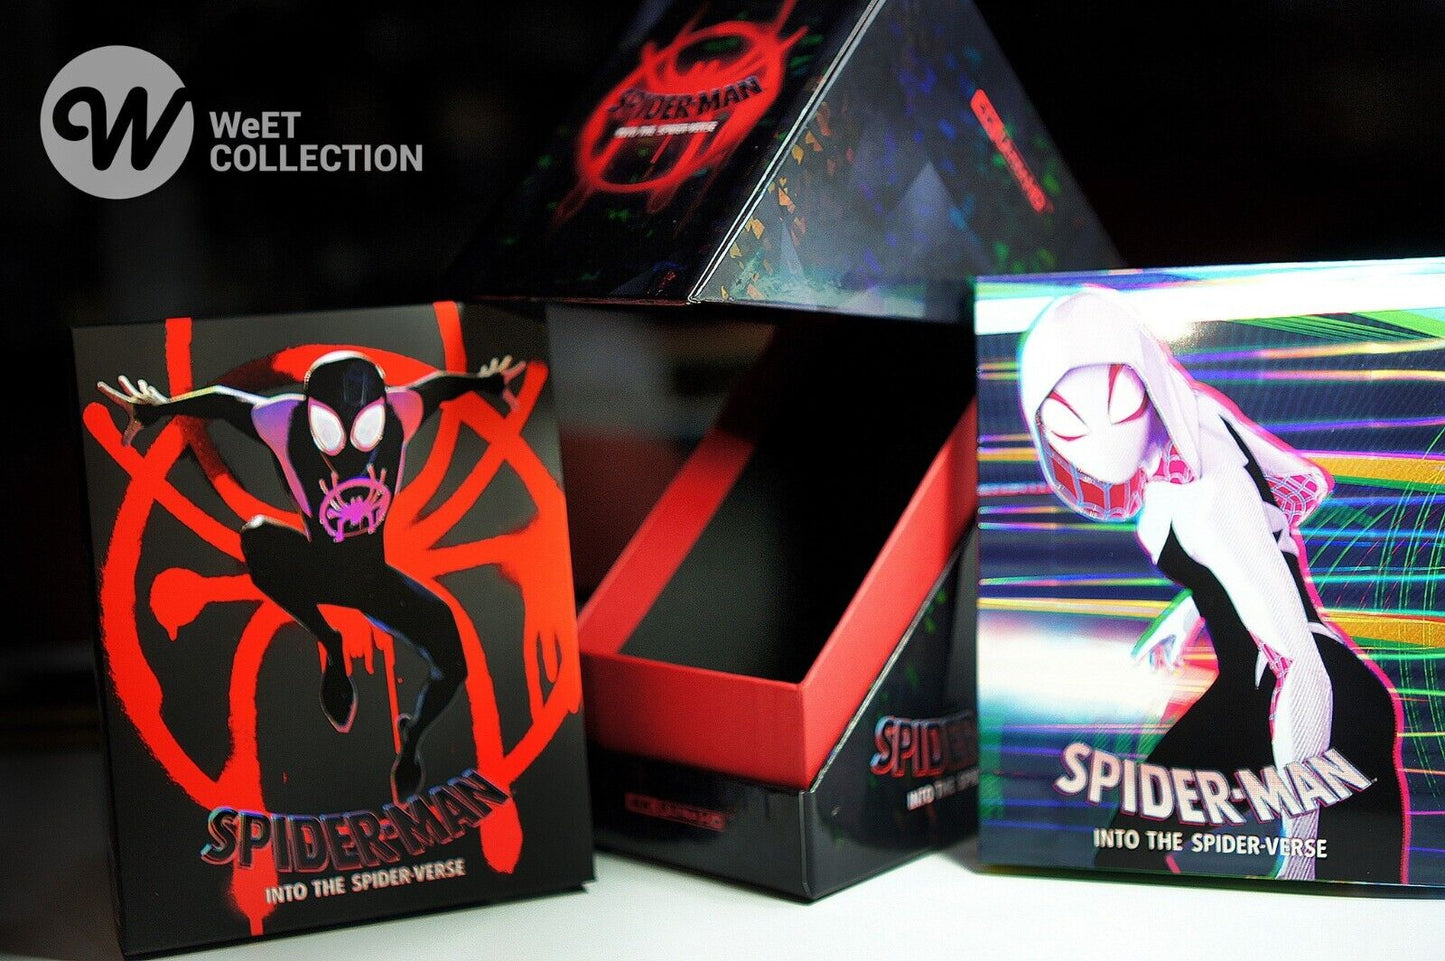 Spider-Man: Into the Spider-Verse 4K Blu-ray Steelbook WeET Collection Exclusive #16 One Click Box Set